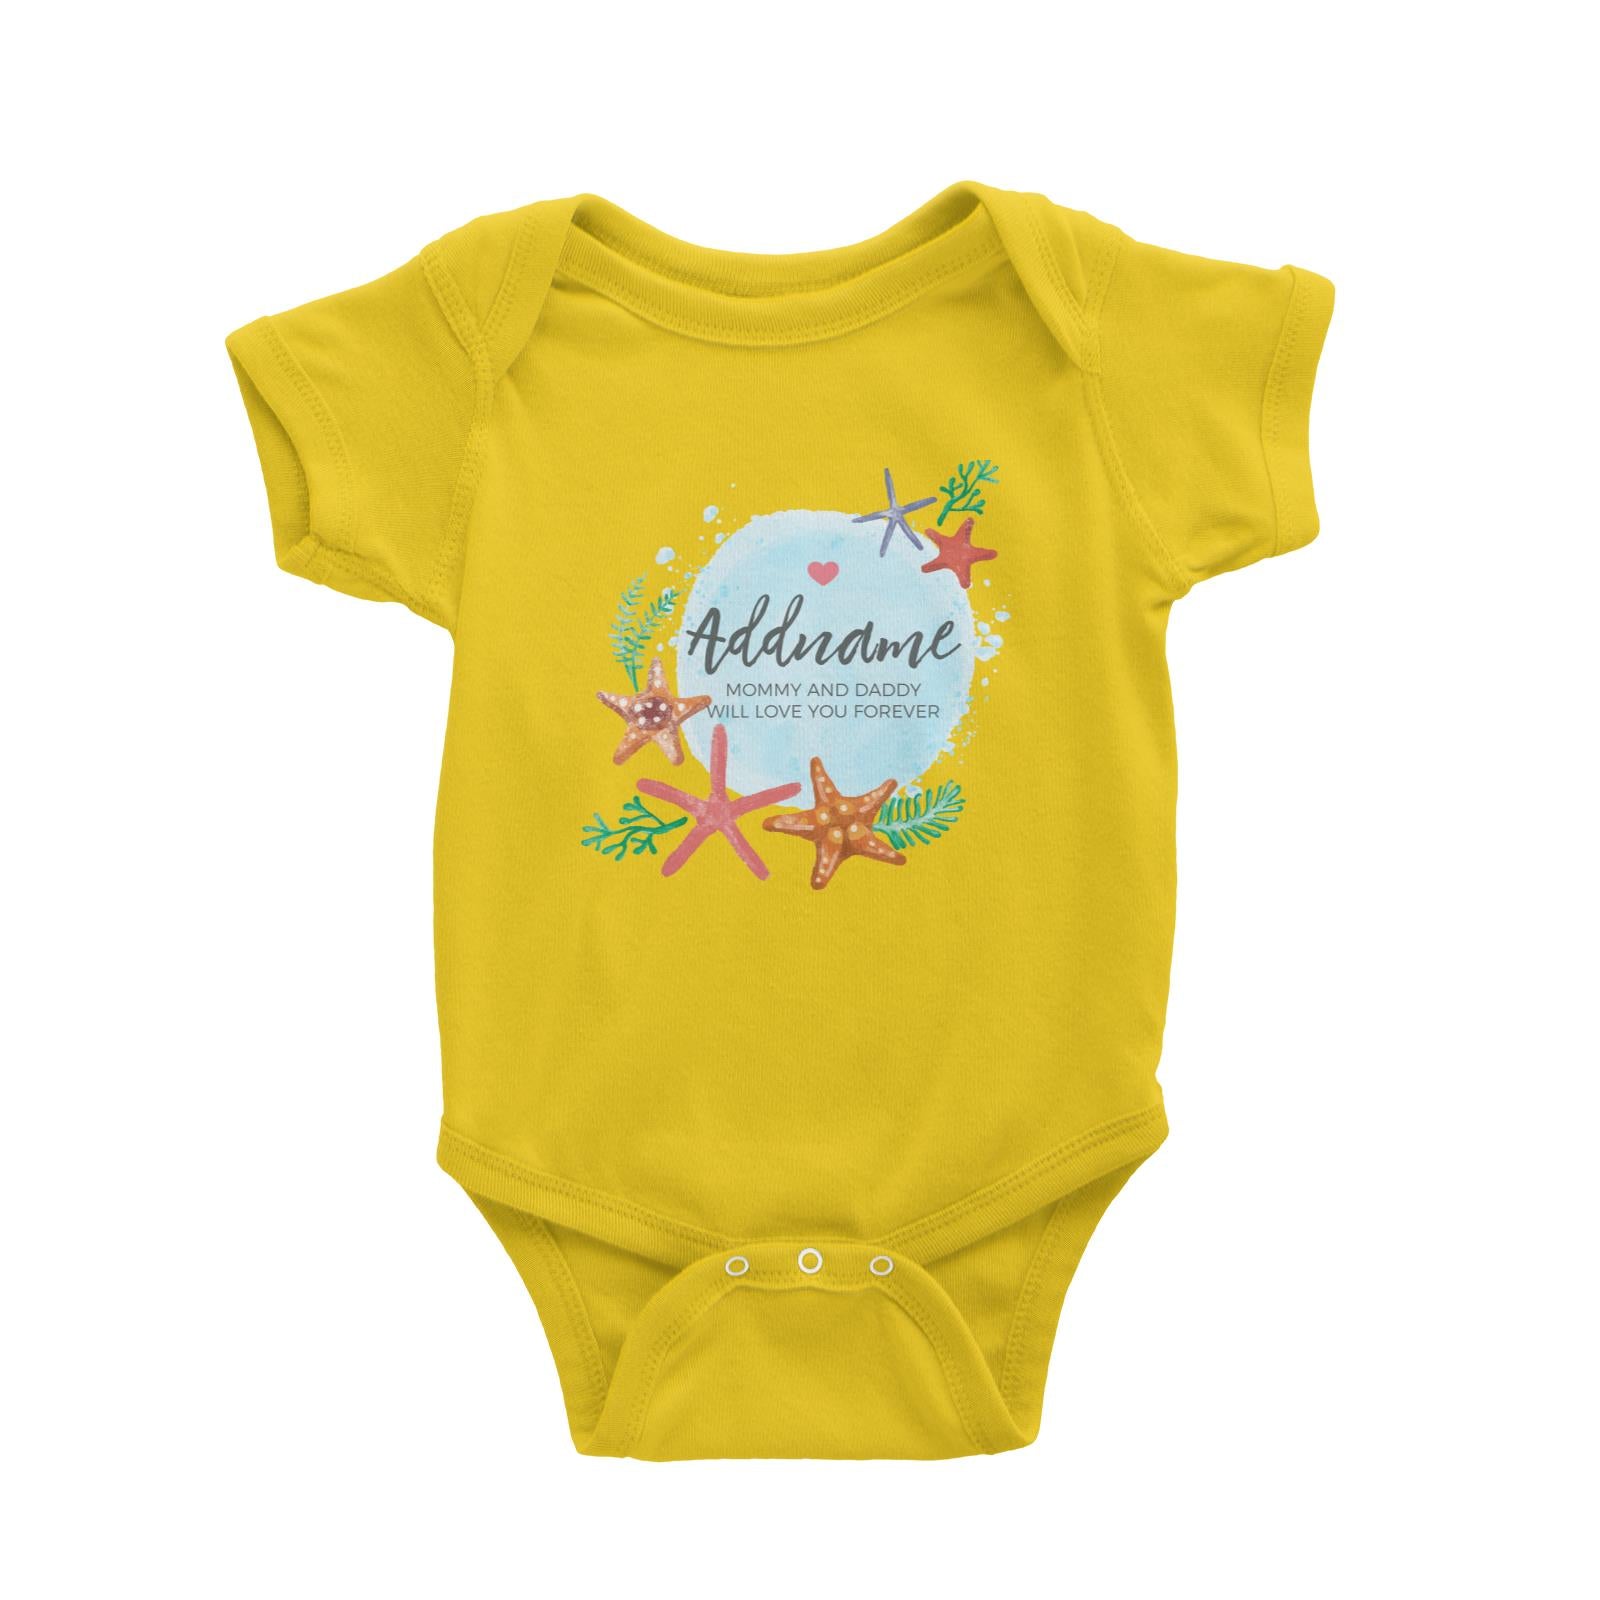 Watercolour Starfish and Coral Elements Personalizable with Name and Text Baby Romper